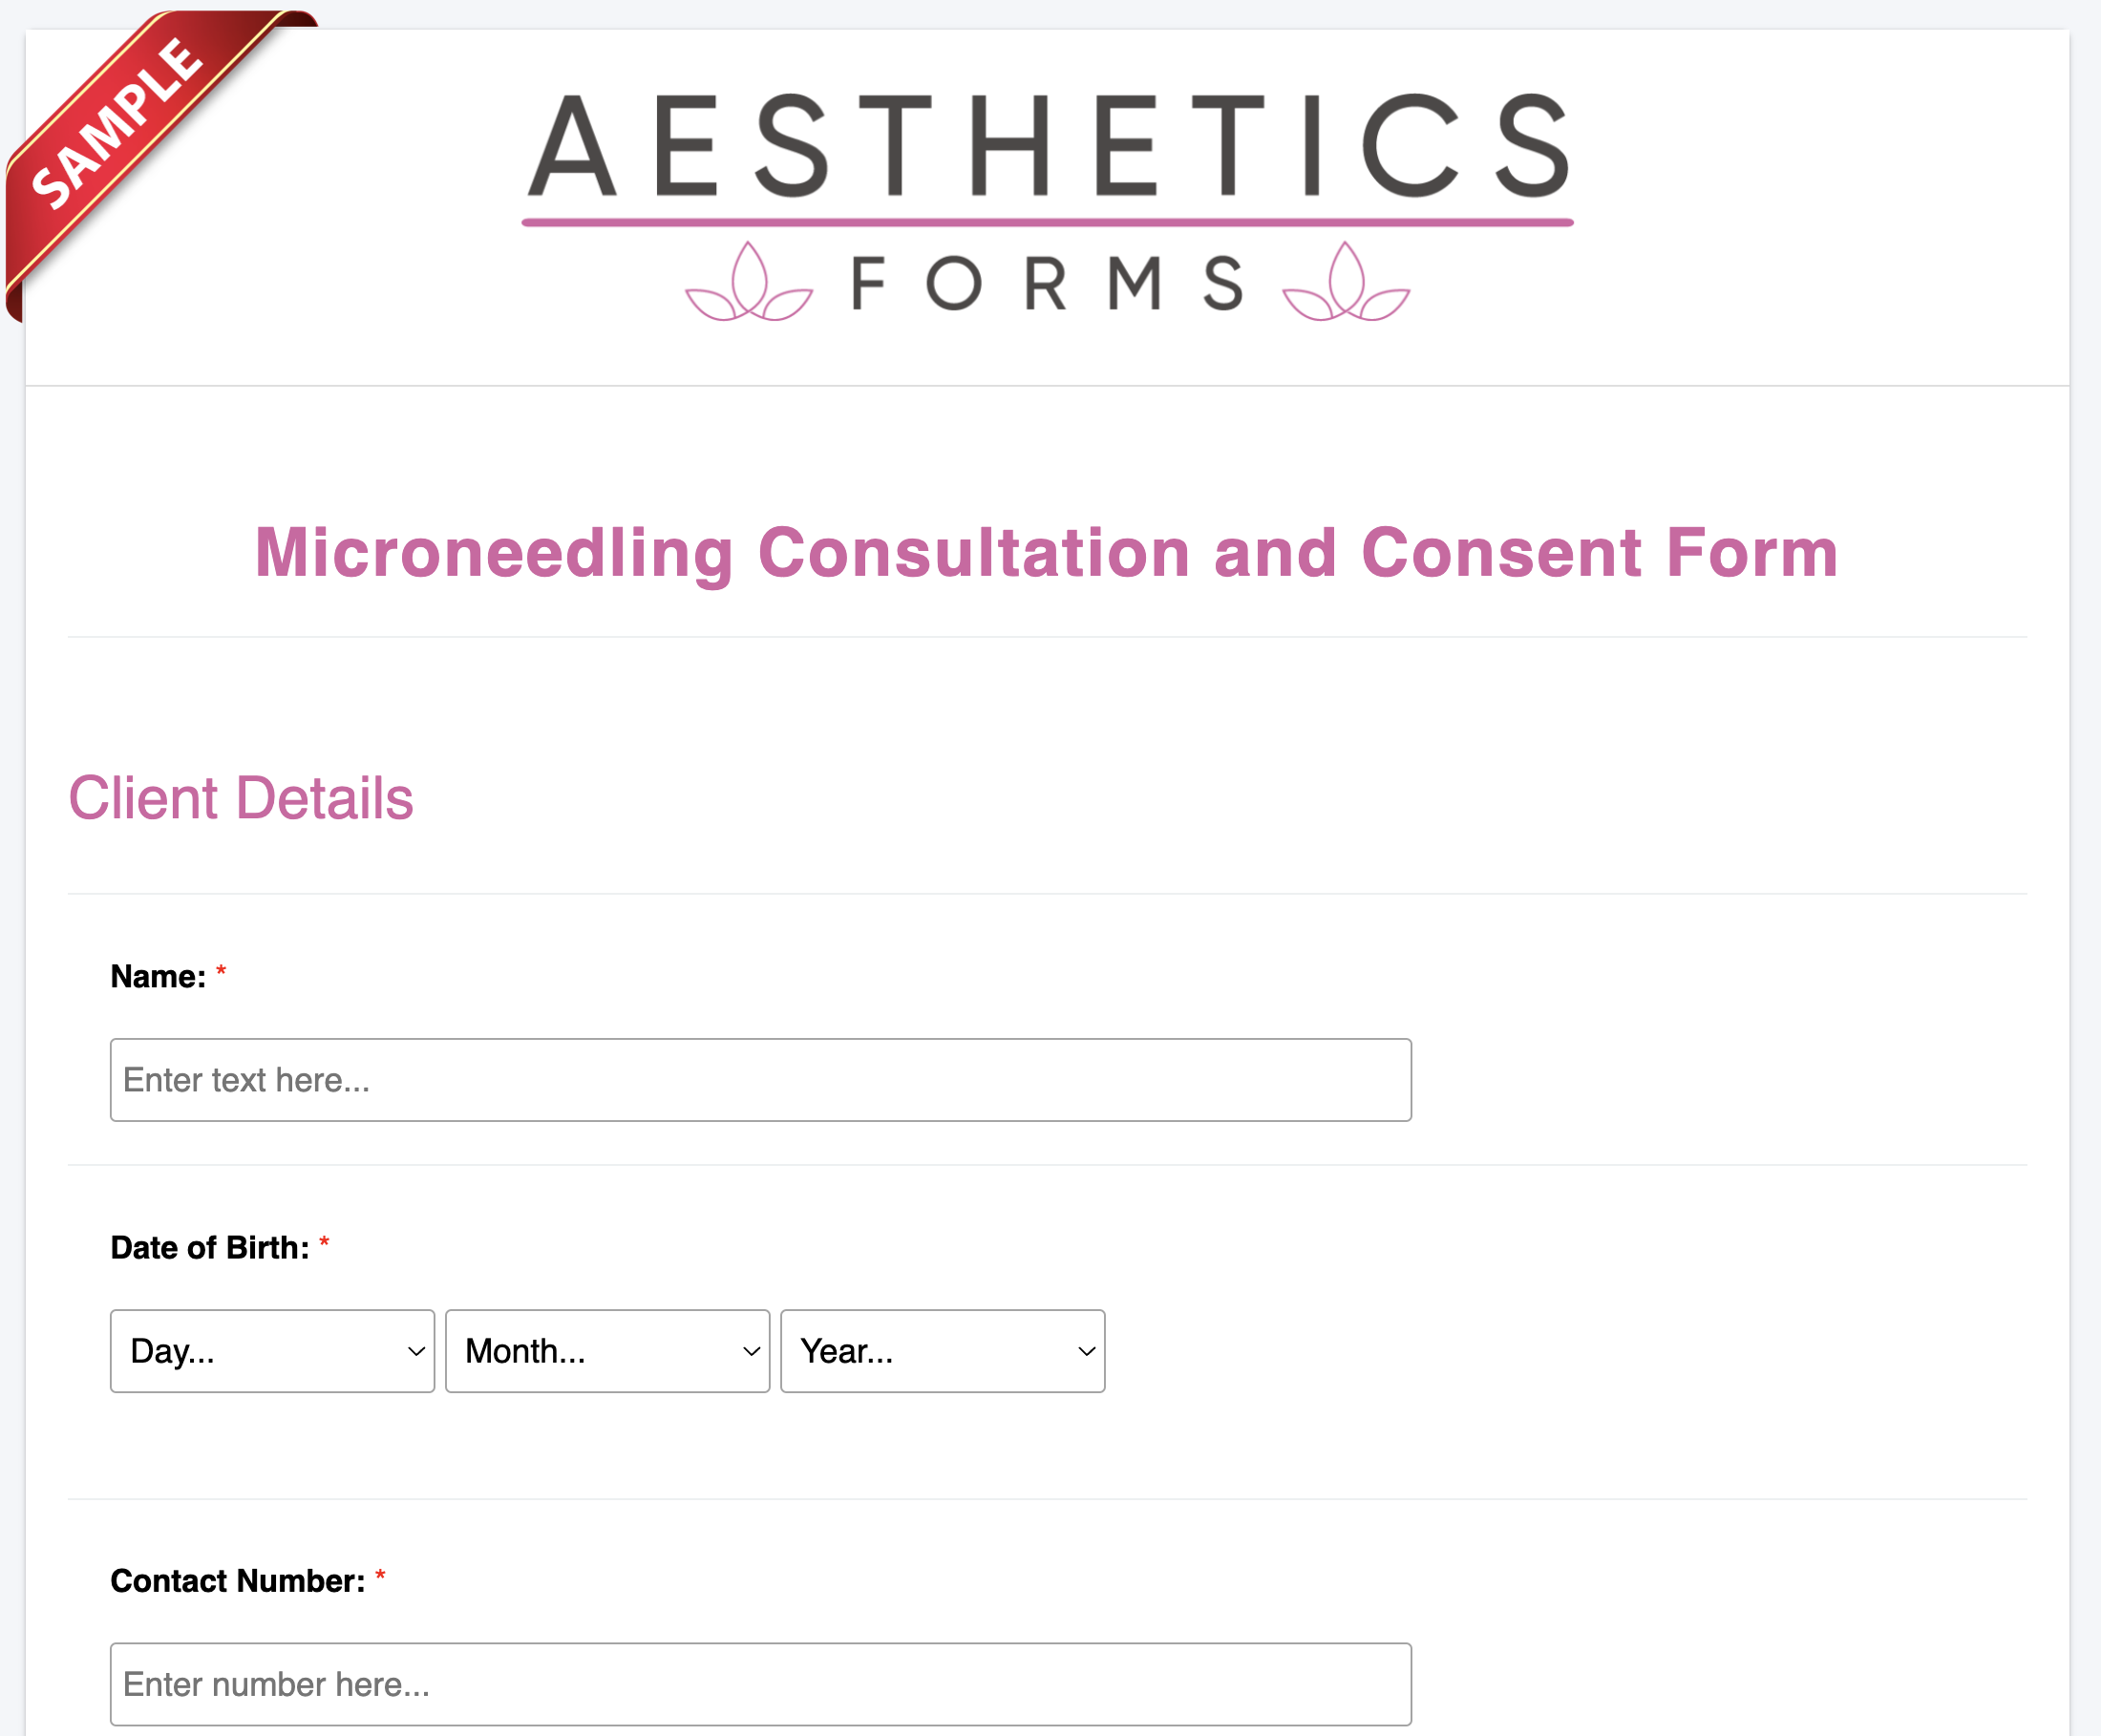 Microneedling Consent Form